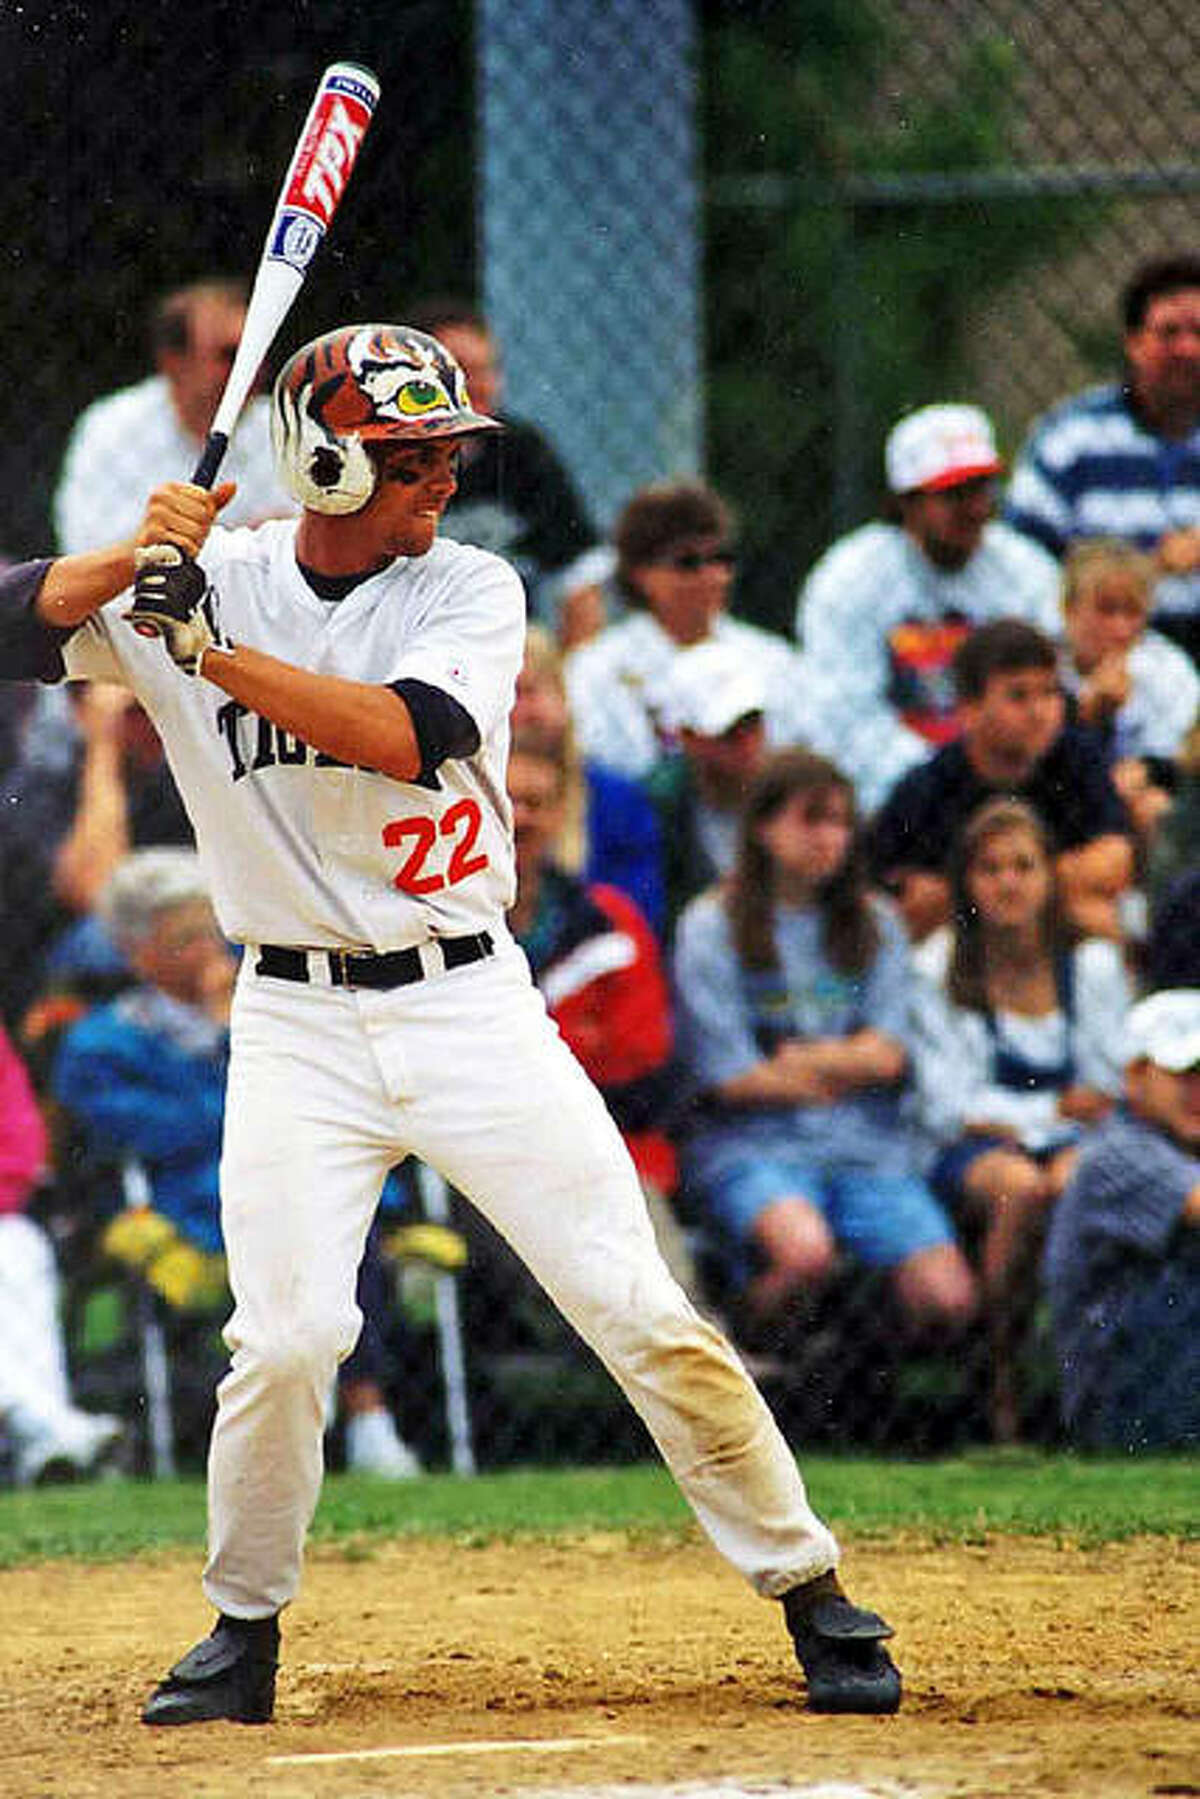 Edwardsville’s Matt Evers waits for a pitch during his senior season in 1998.